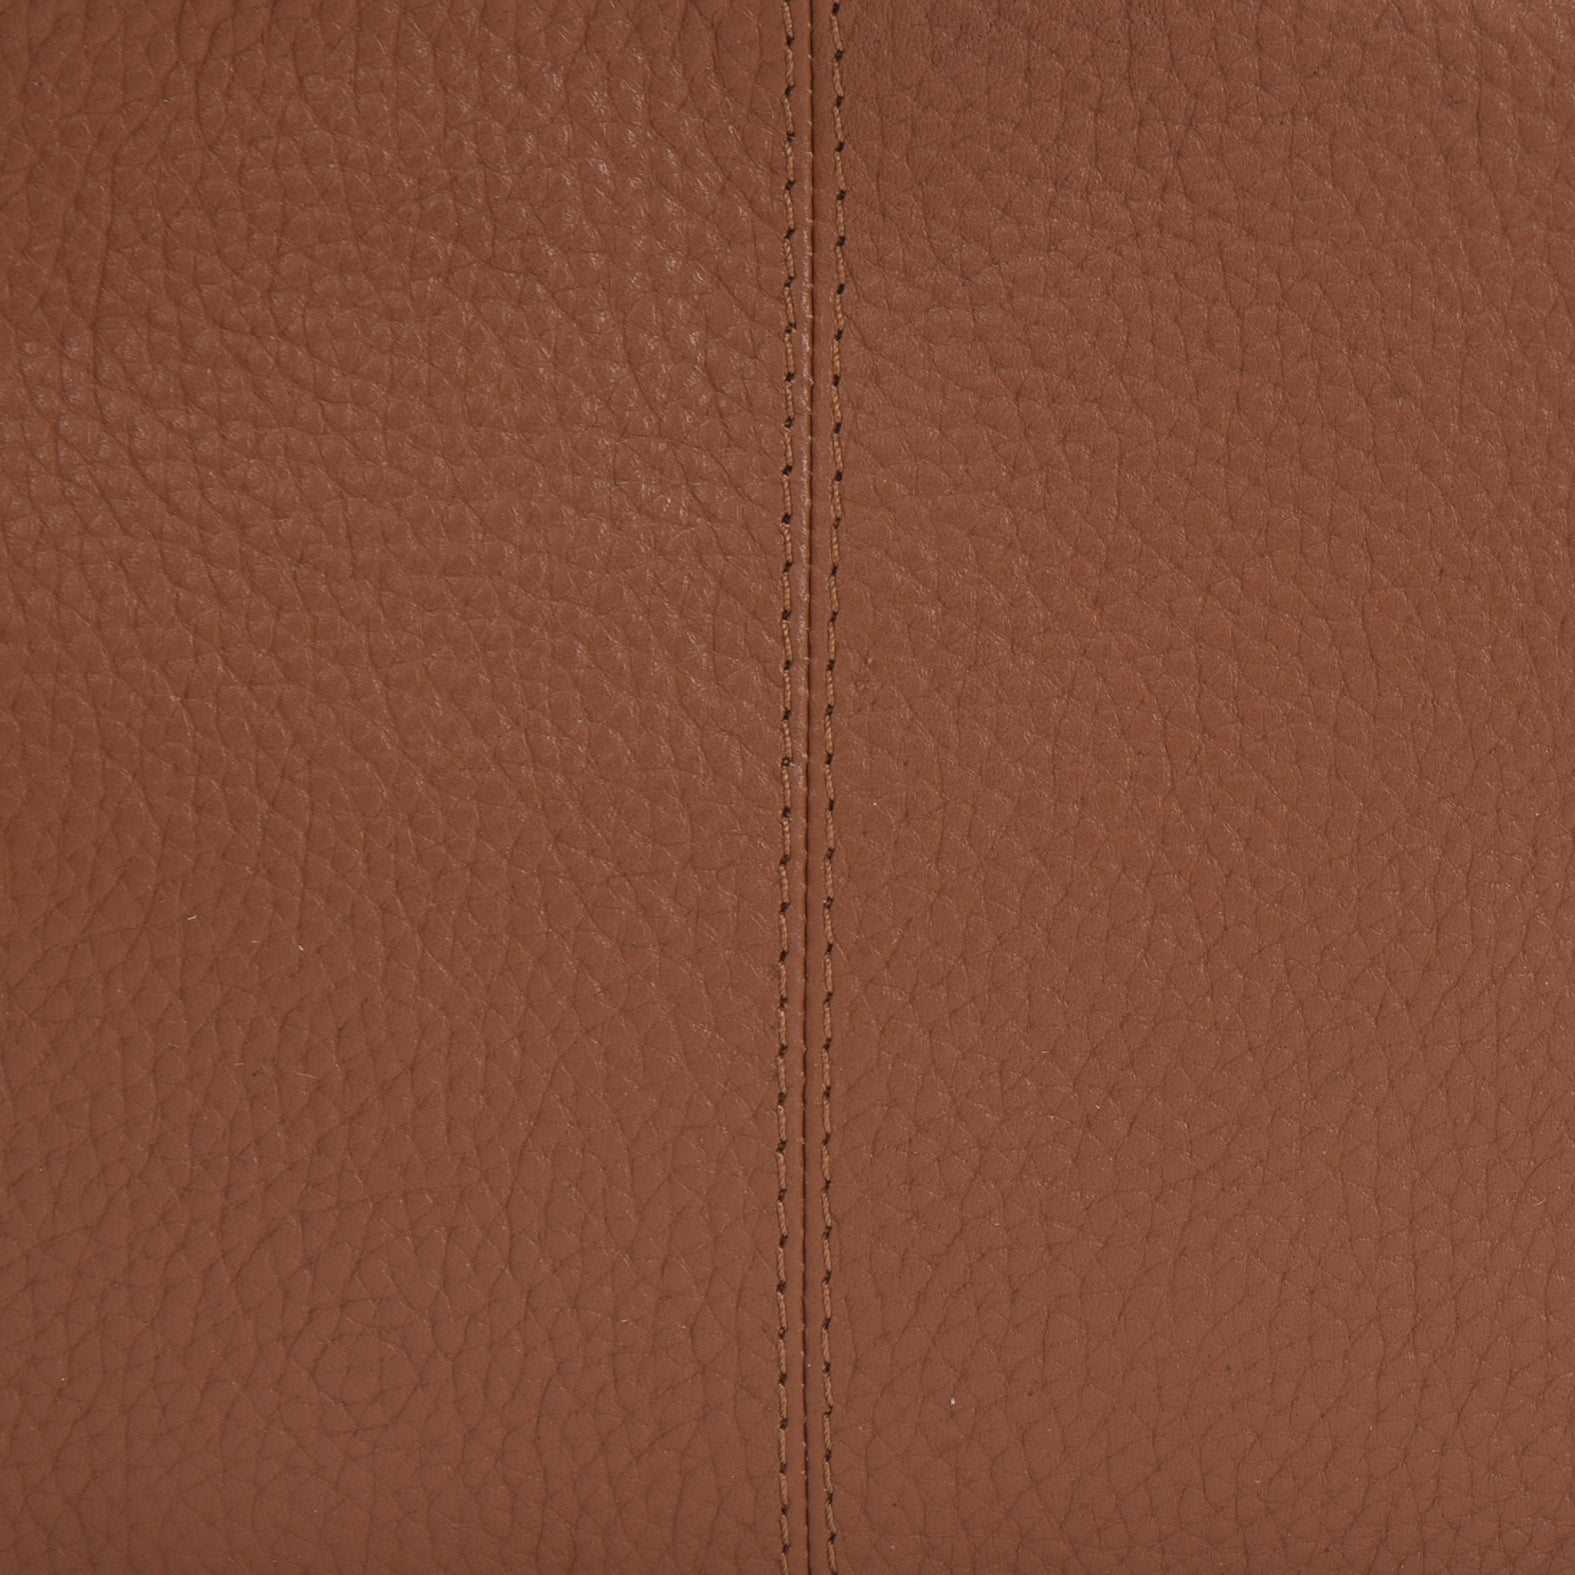 camelethicalleatherbag.jpg